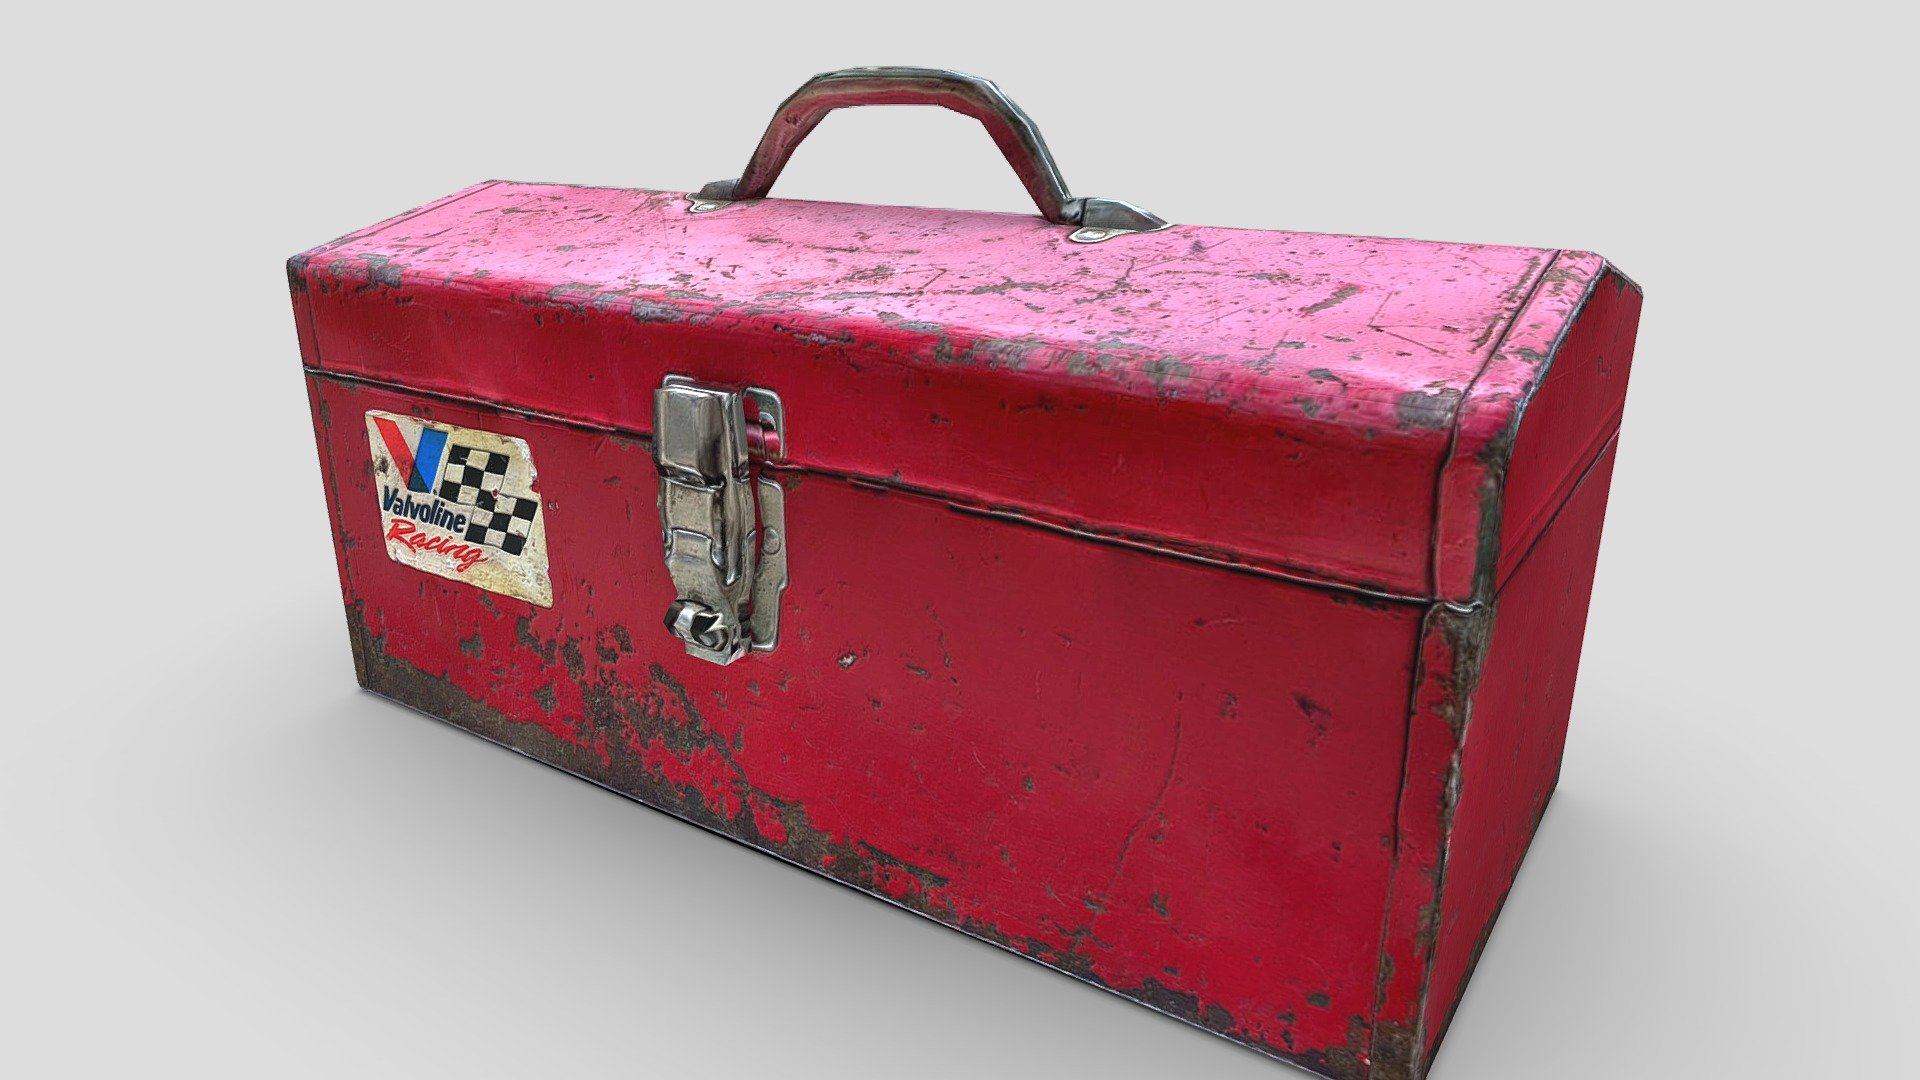 16,791 Artist Tool Box Images, Stock Photos, 3D objects, & Vectors